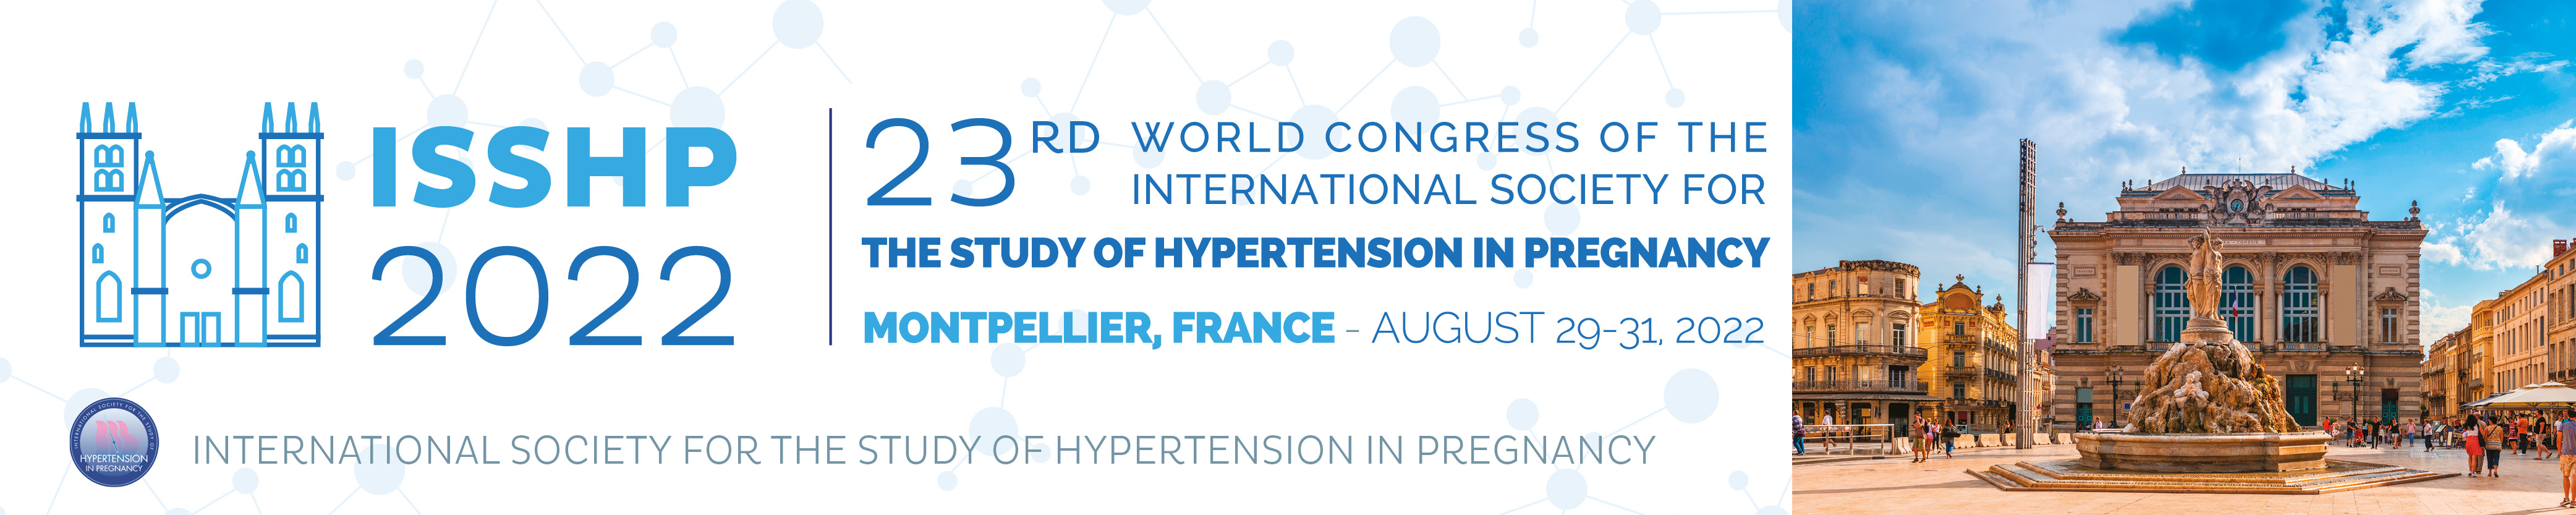 The 23rd World Congress of the International Society for the Study of Hypertension in Pregnancy